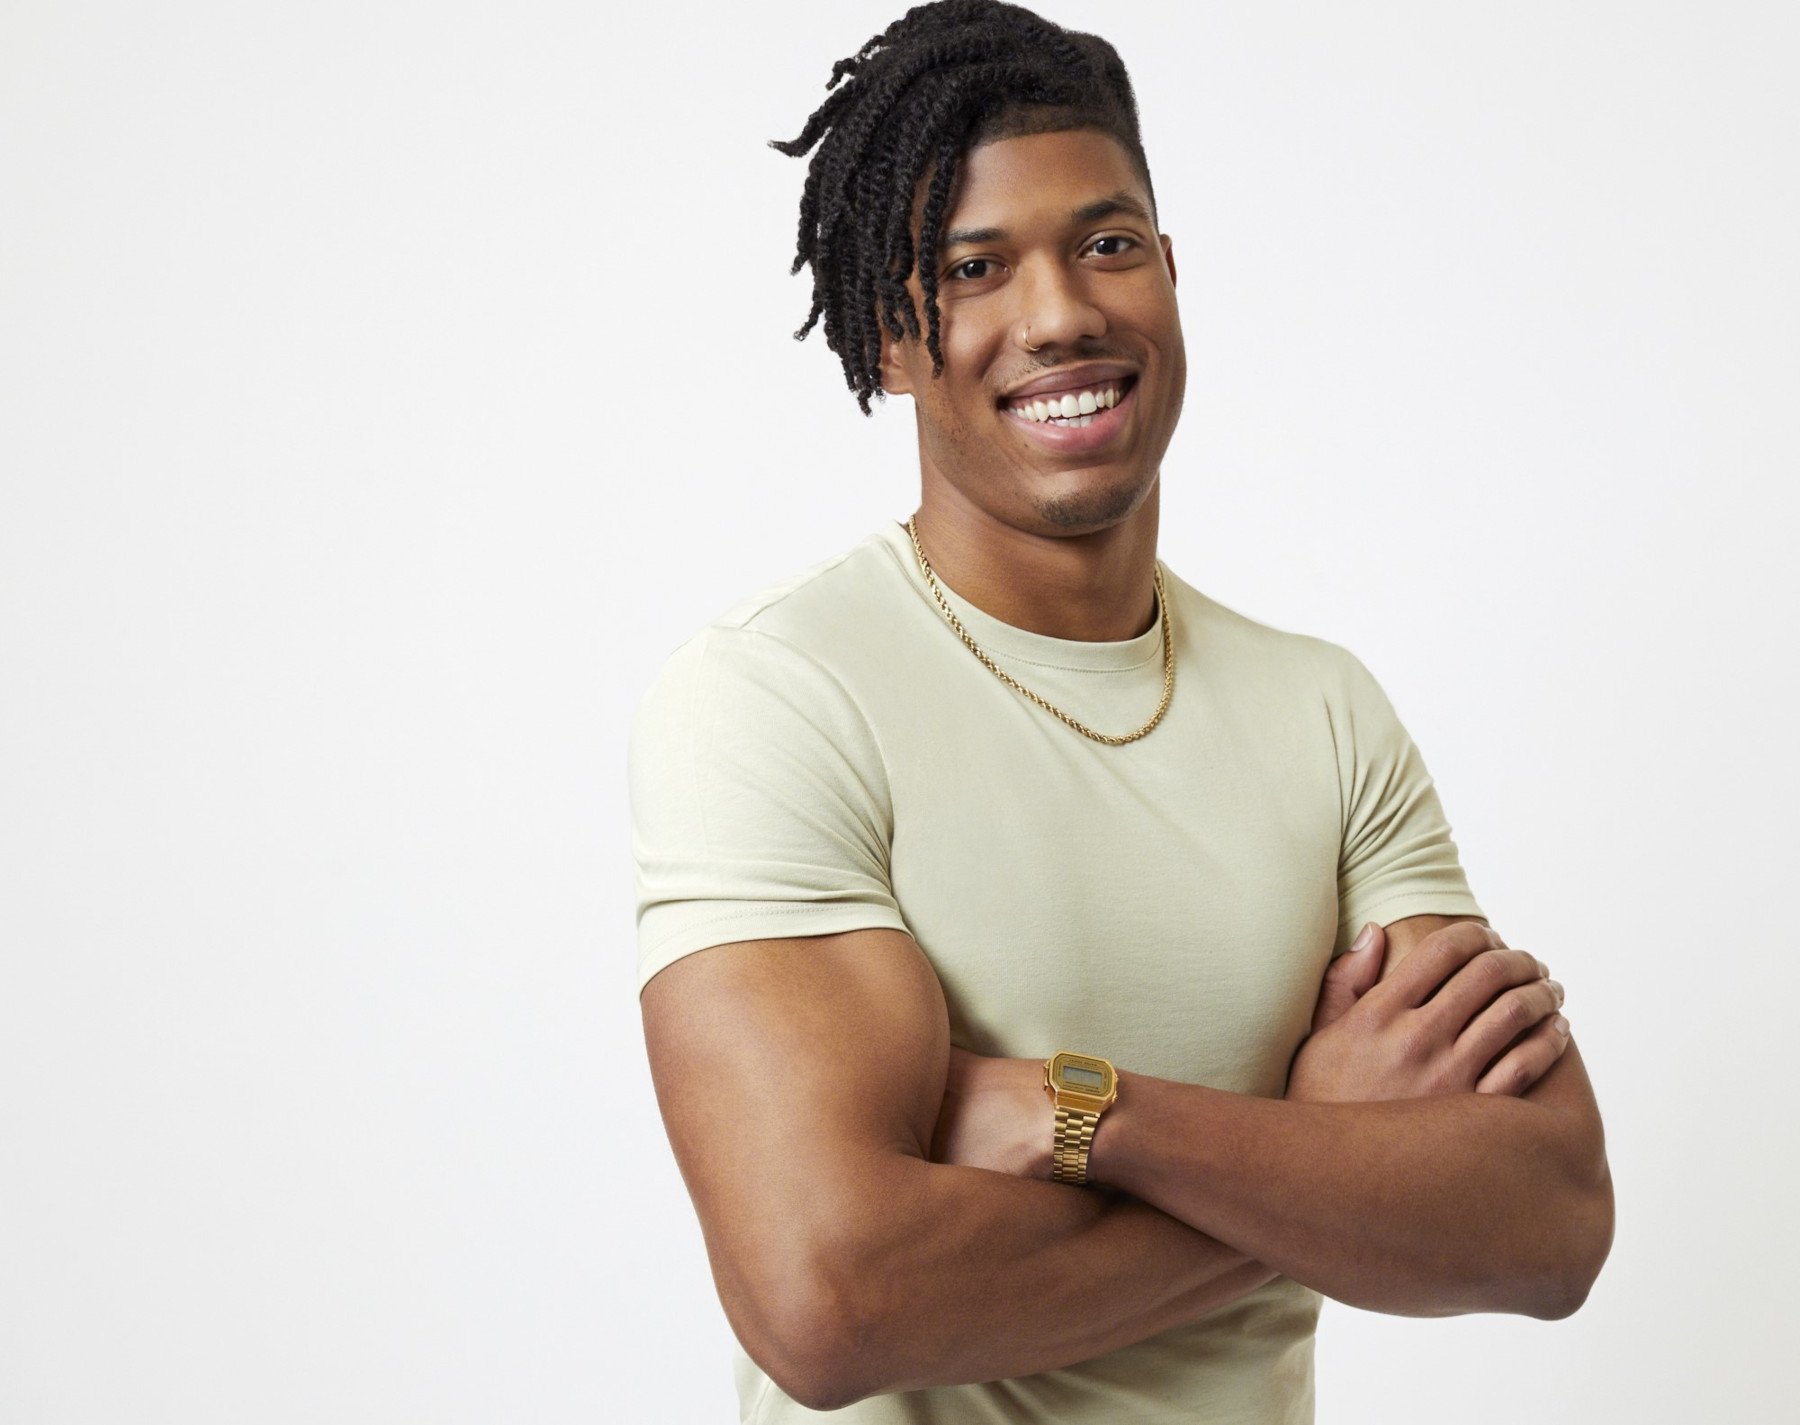 'The Bachelorette' 2022 contestant Nate Mitchell. He's wearing a white T-shirt, gold chain, and crossing his arms.